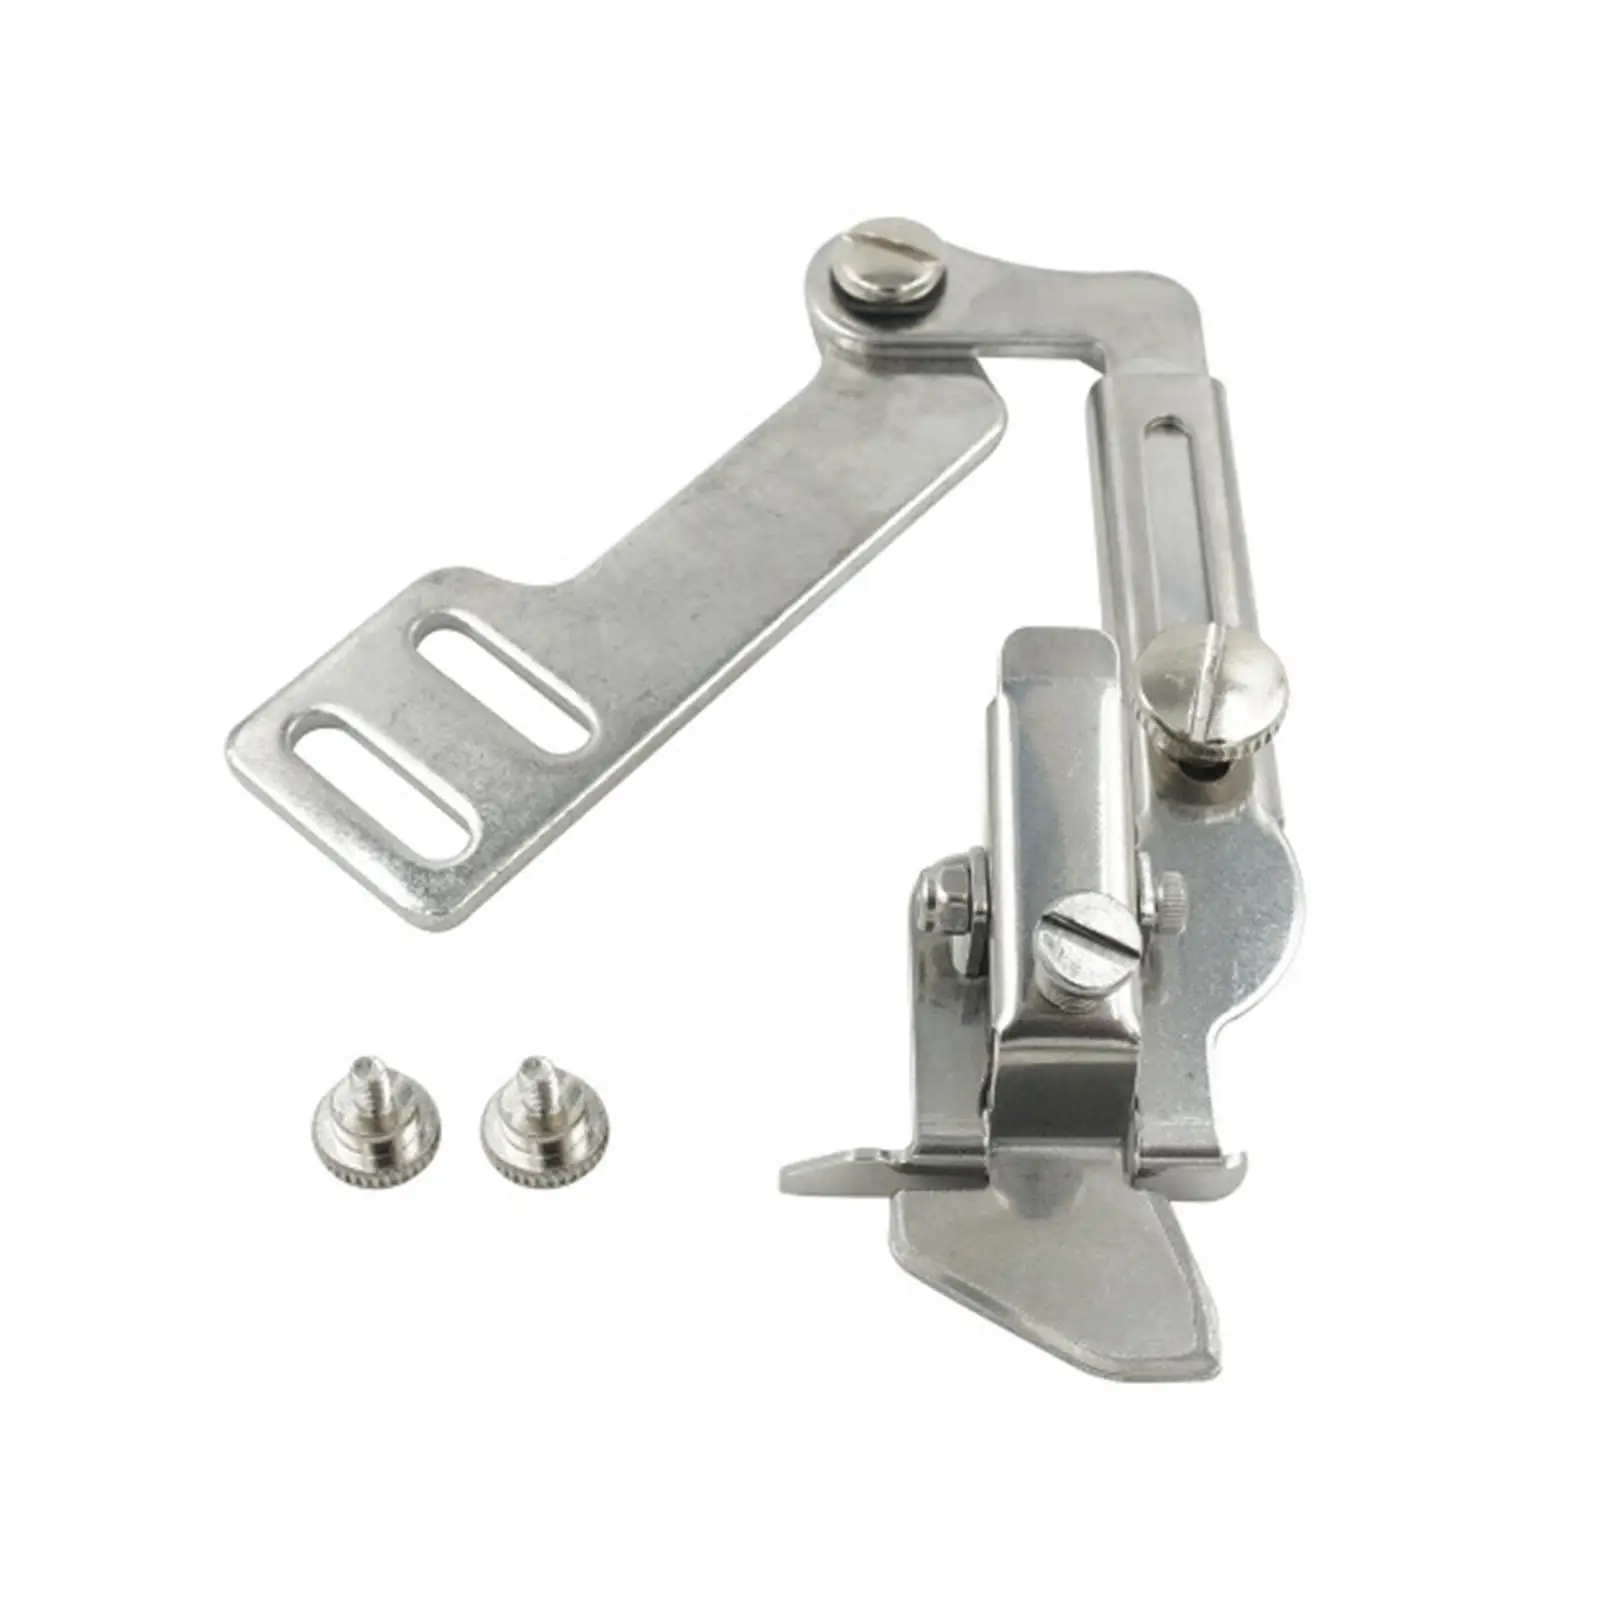 Sewing Machine Presser Foot Industrial Walking Foot Universal Sew Machines Edge Guide Curling Device Quilting Patchwork